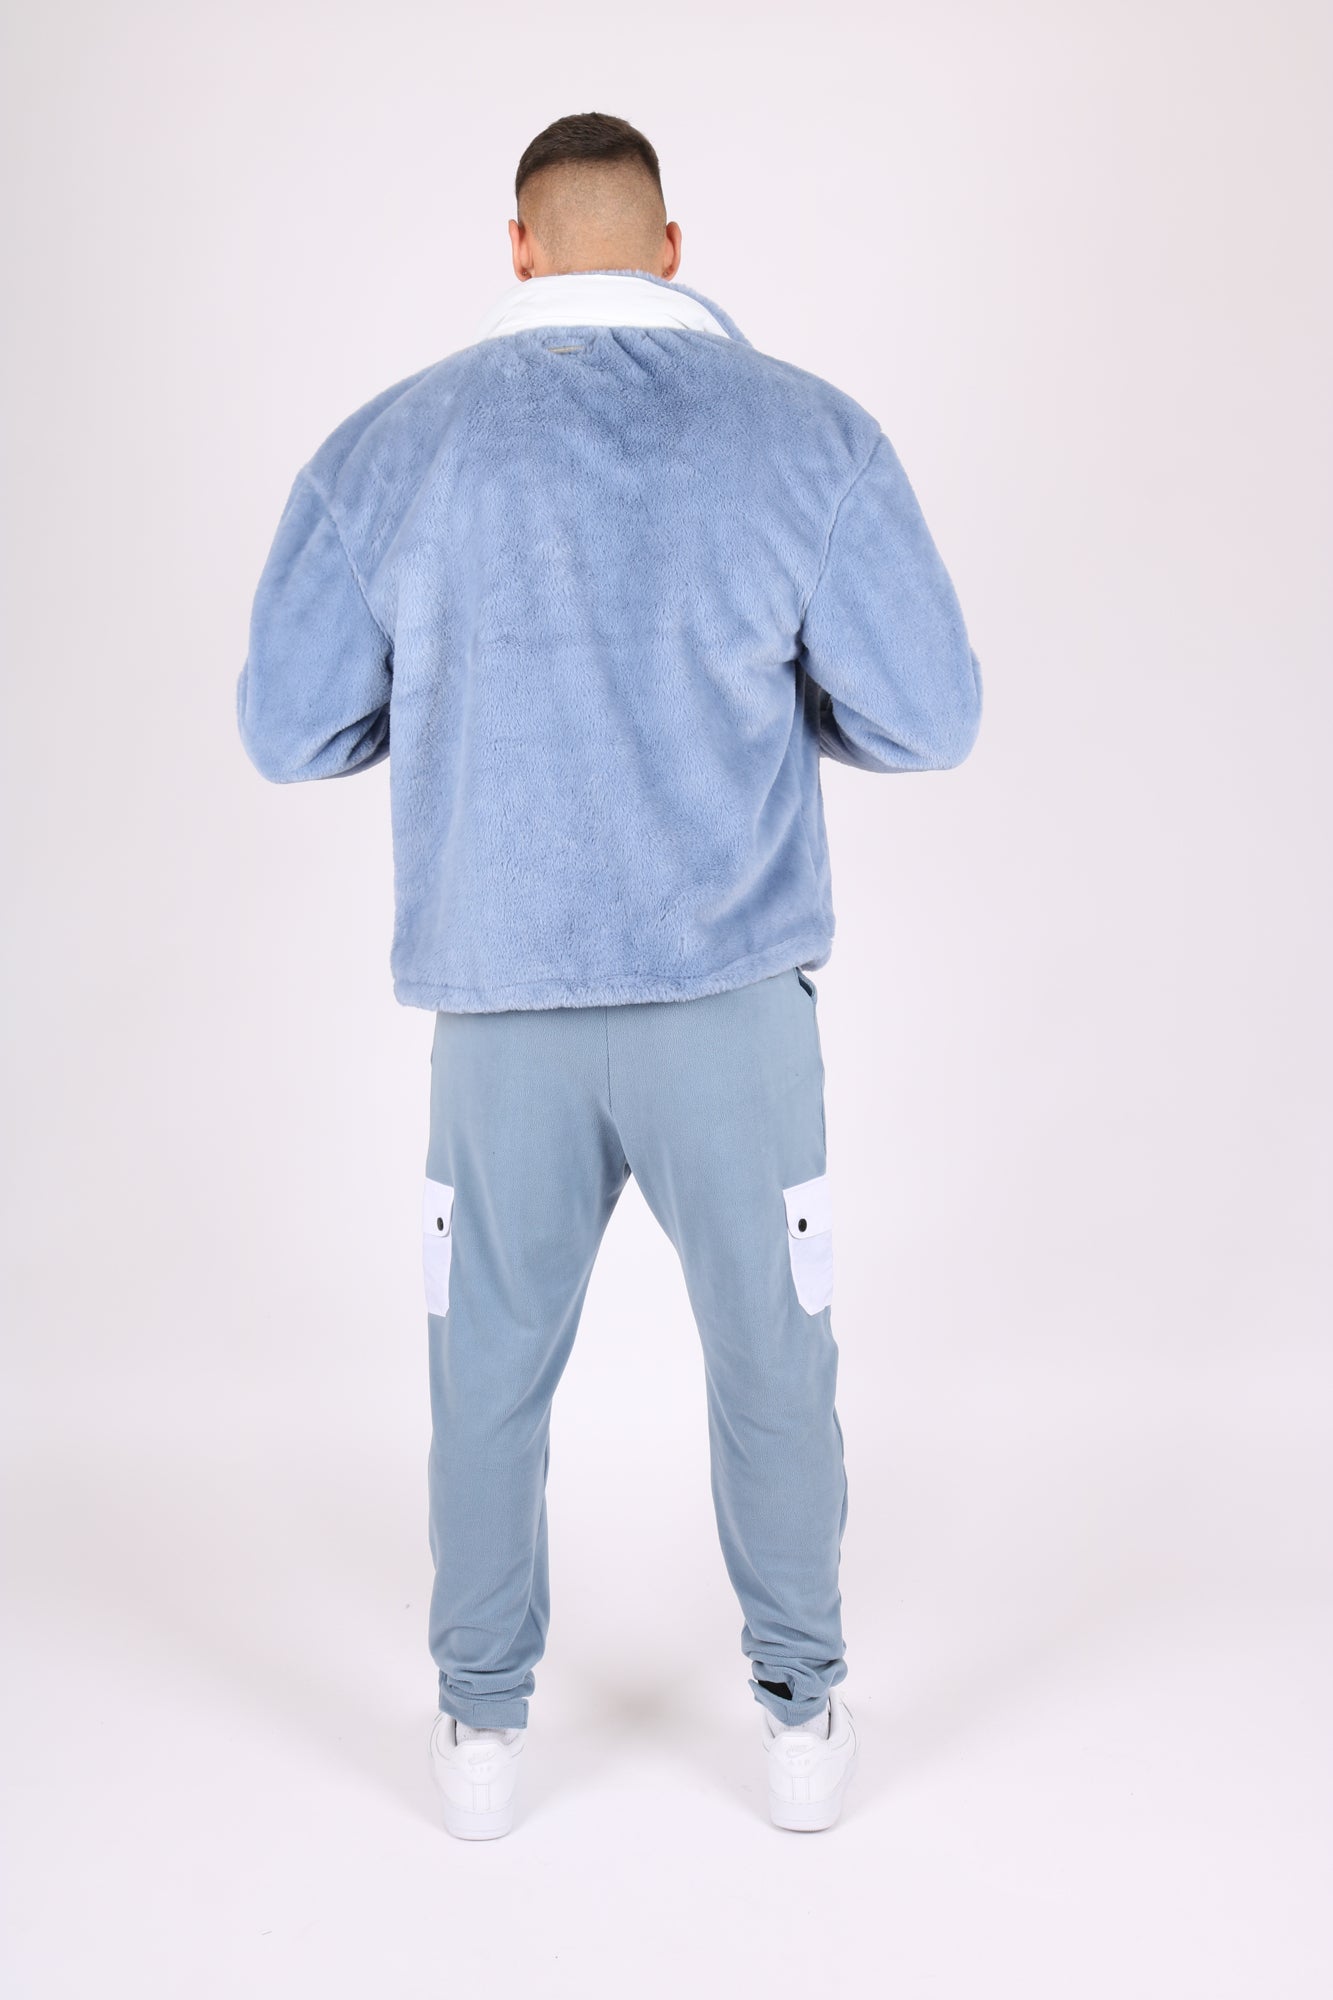 Utility Fur Jacket In Baby Blue With White Nylon Pockets